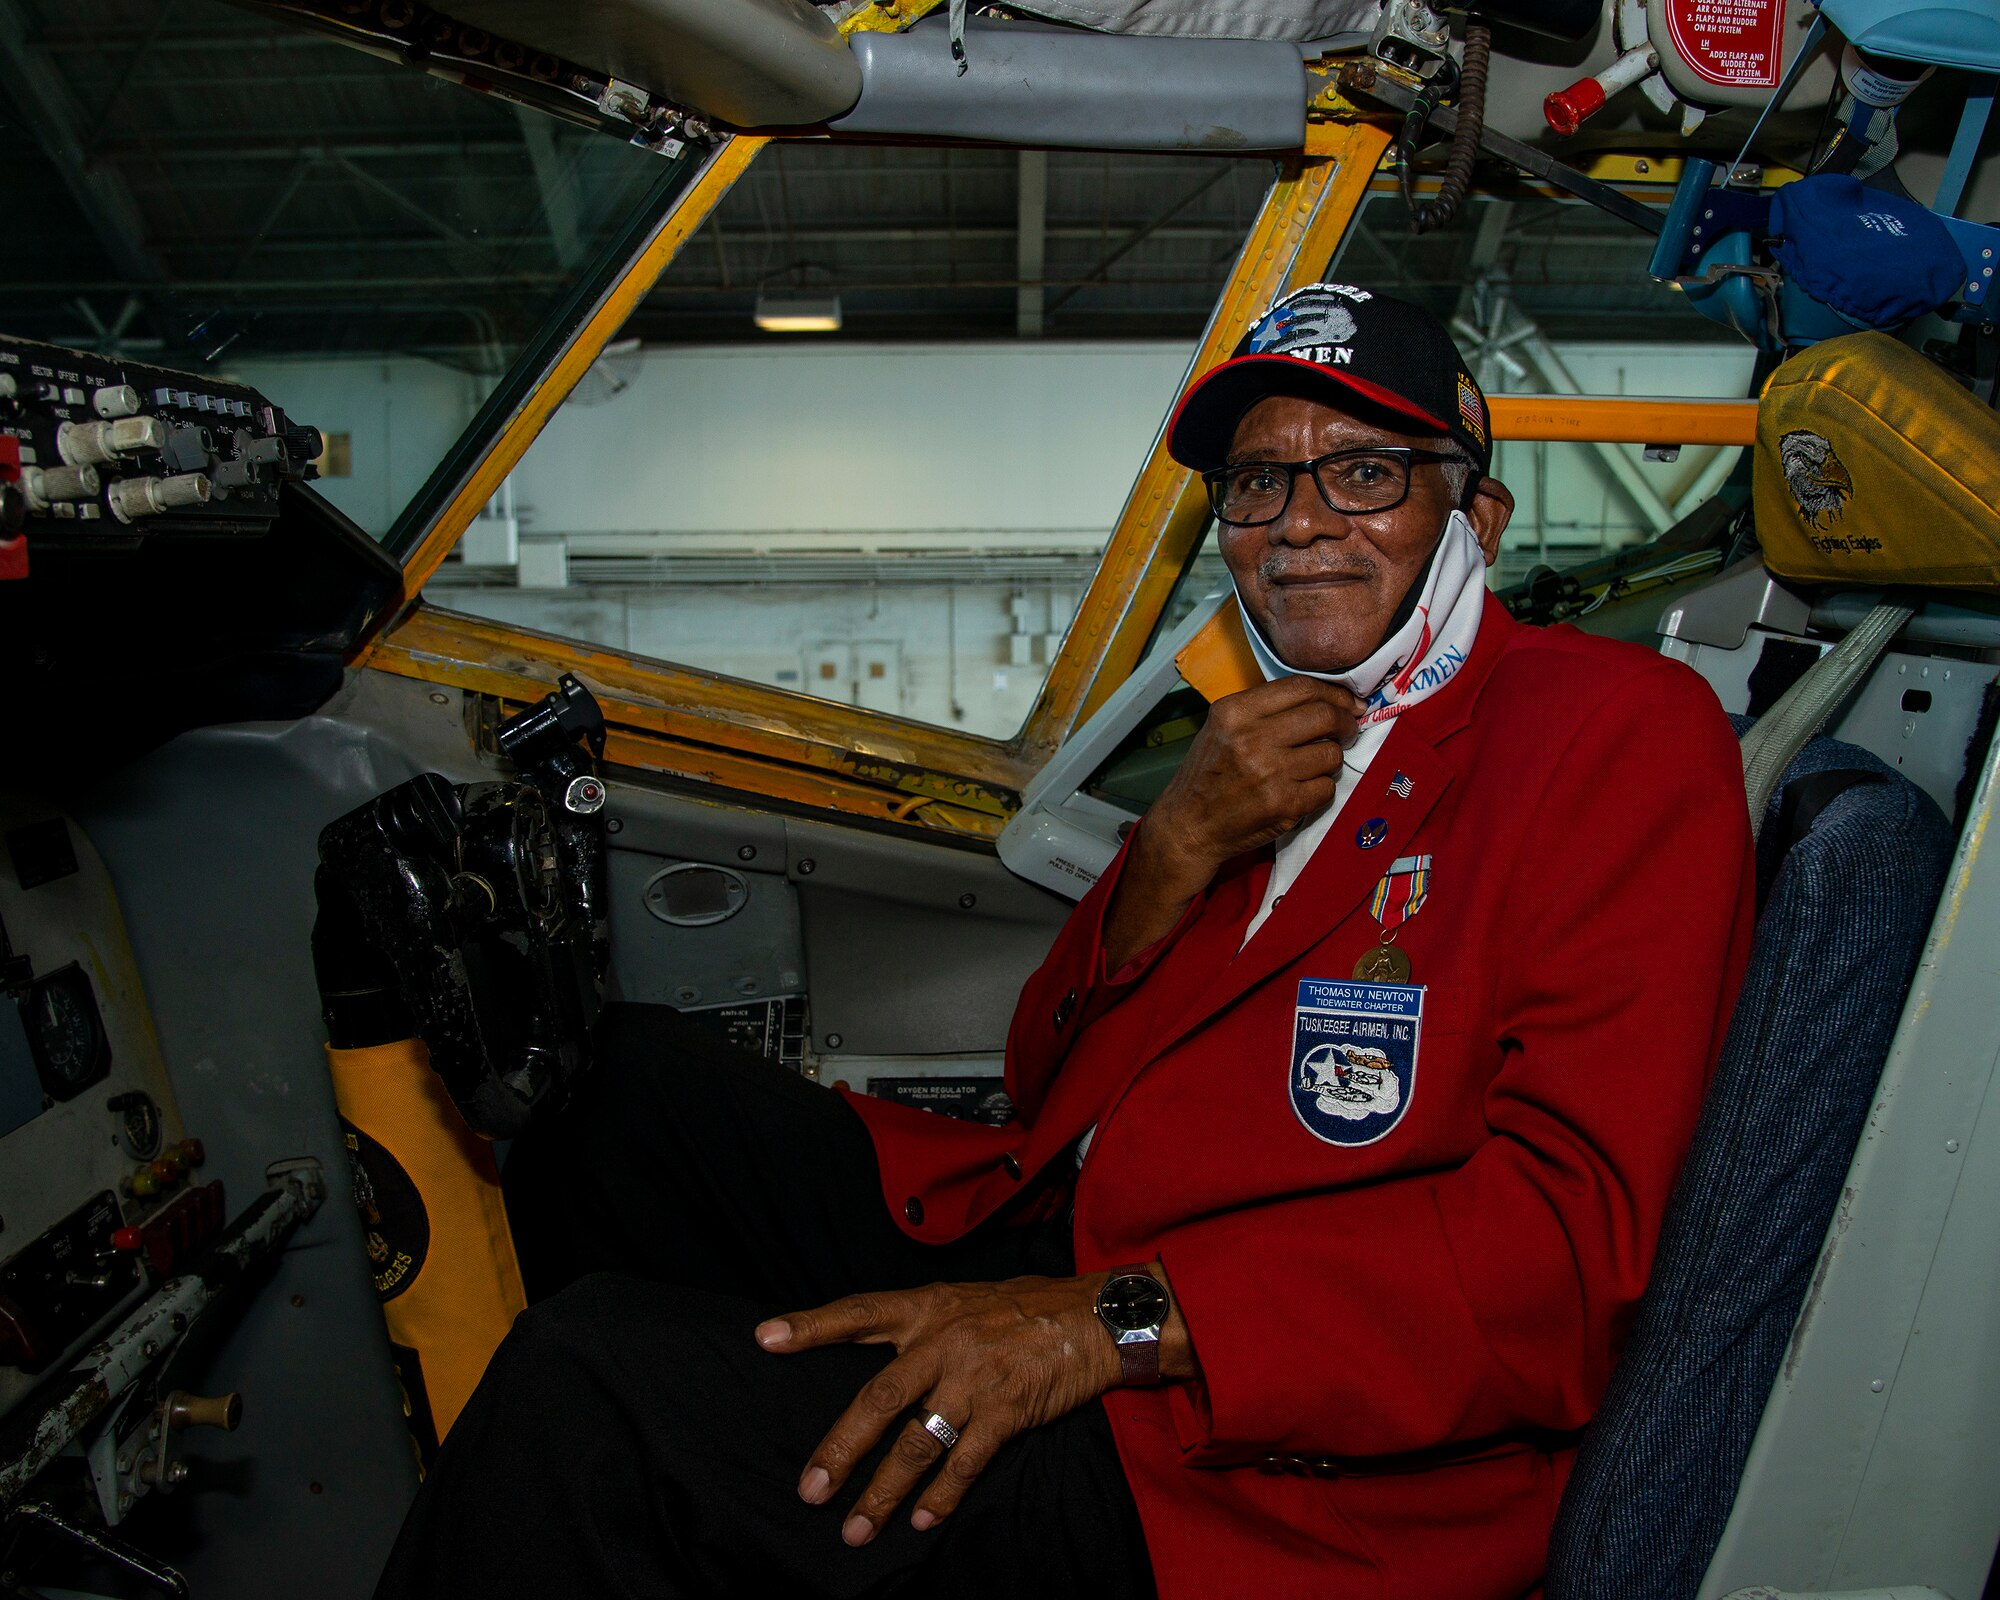 U.S. Army Air Forces Sgt. Thomas Newton, a Documented Original Tuskegee Airman, sits in the co-pilot seat of a KC-135 Stratotanker at MacDill Air Force Base Fla., Nov. 10, 2020.